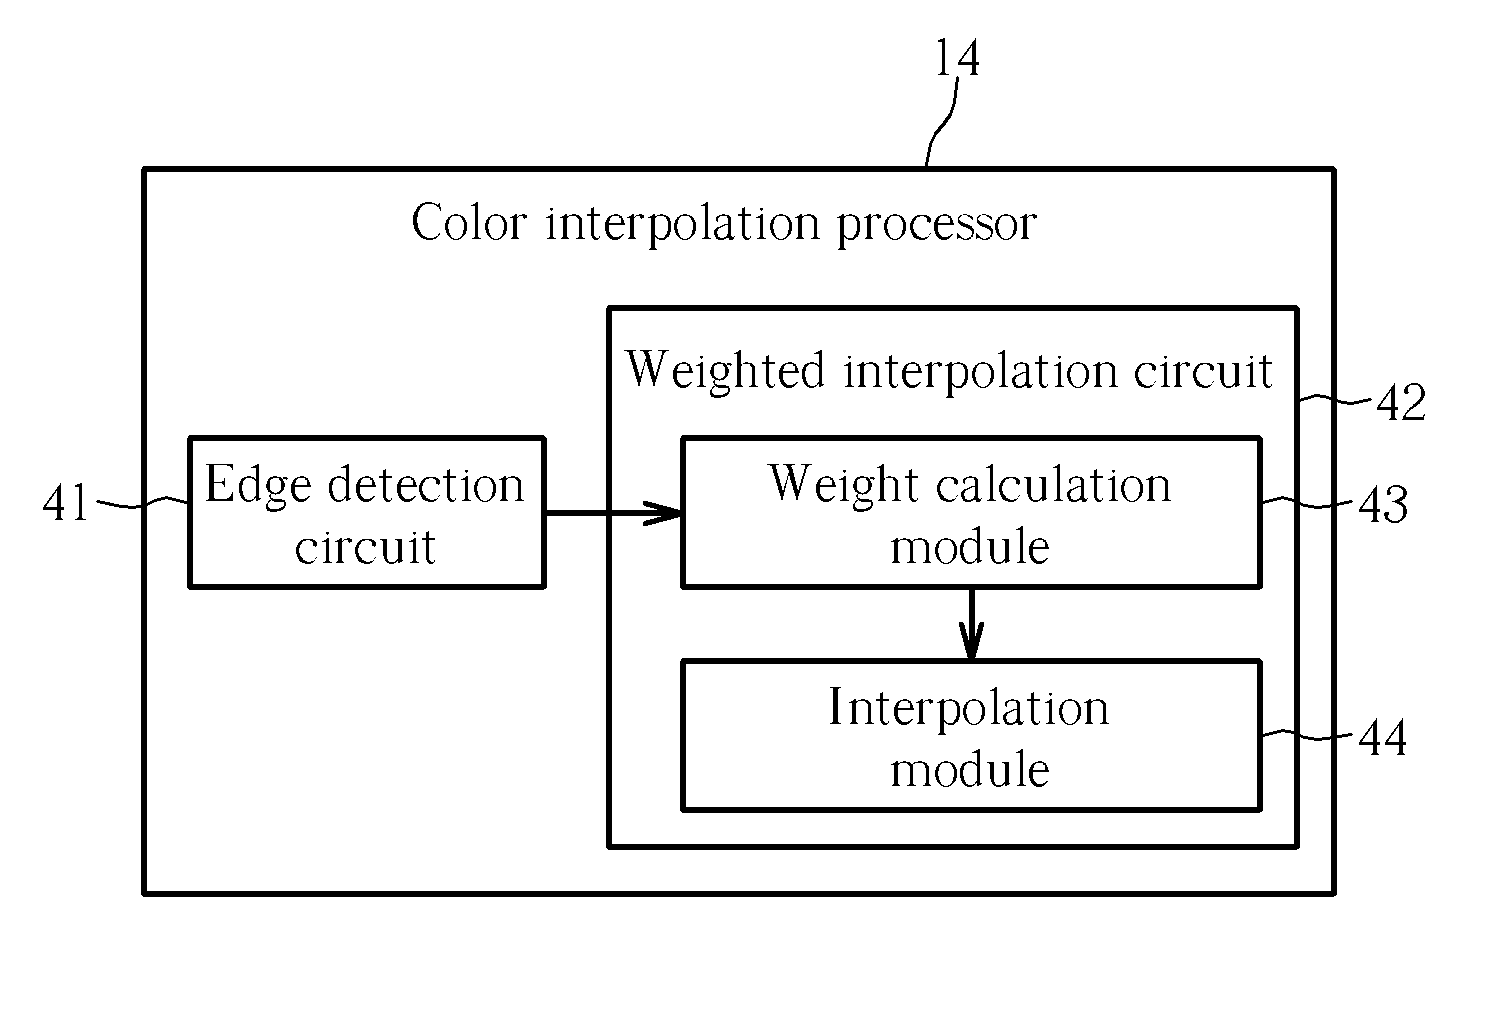 Color interpolation apparatus and color interpolation method utilizing edge indicators adjusted by stochastic adjustment factors to reconstruct missing colors for image pixels